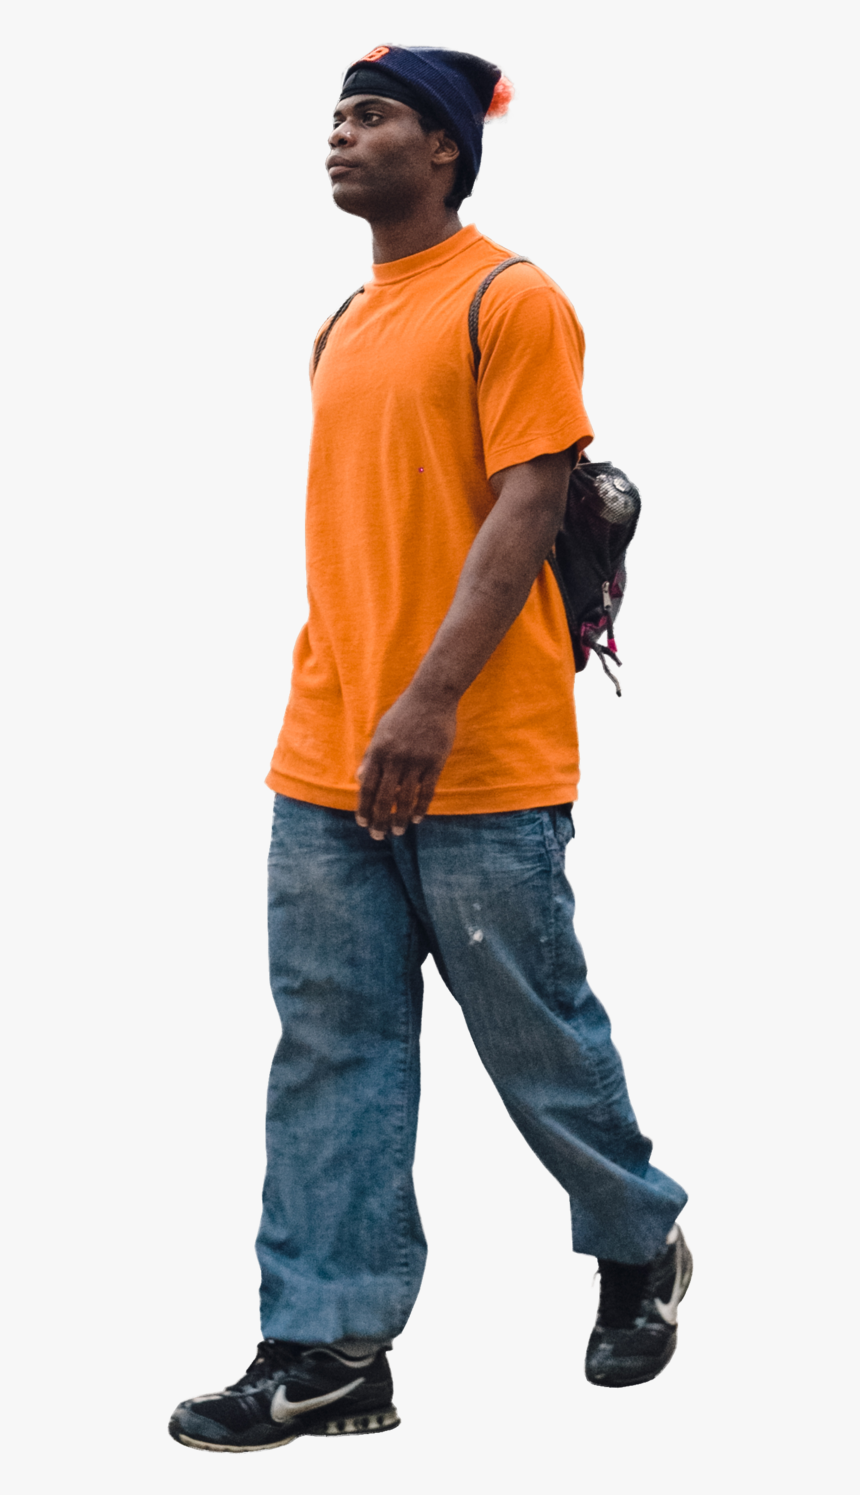 Youthmanwalkingfrontside - African American People Png, Transparent Png, Free Download